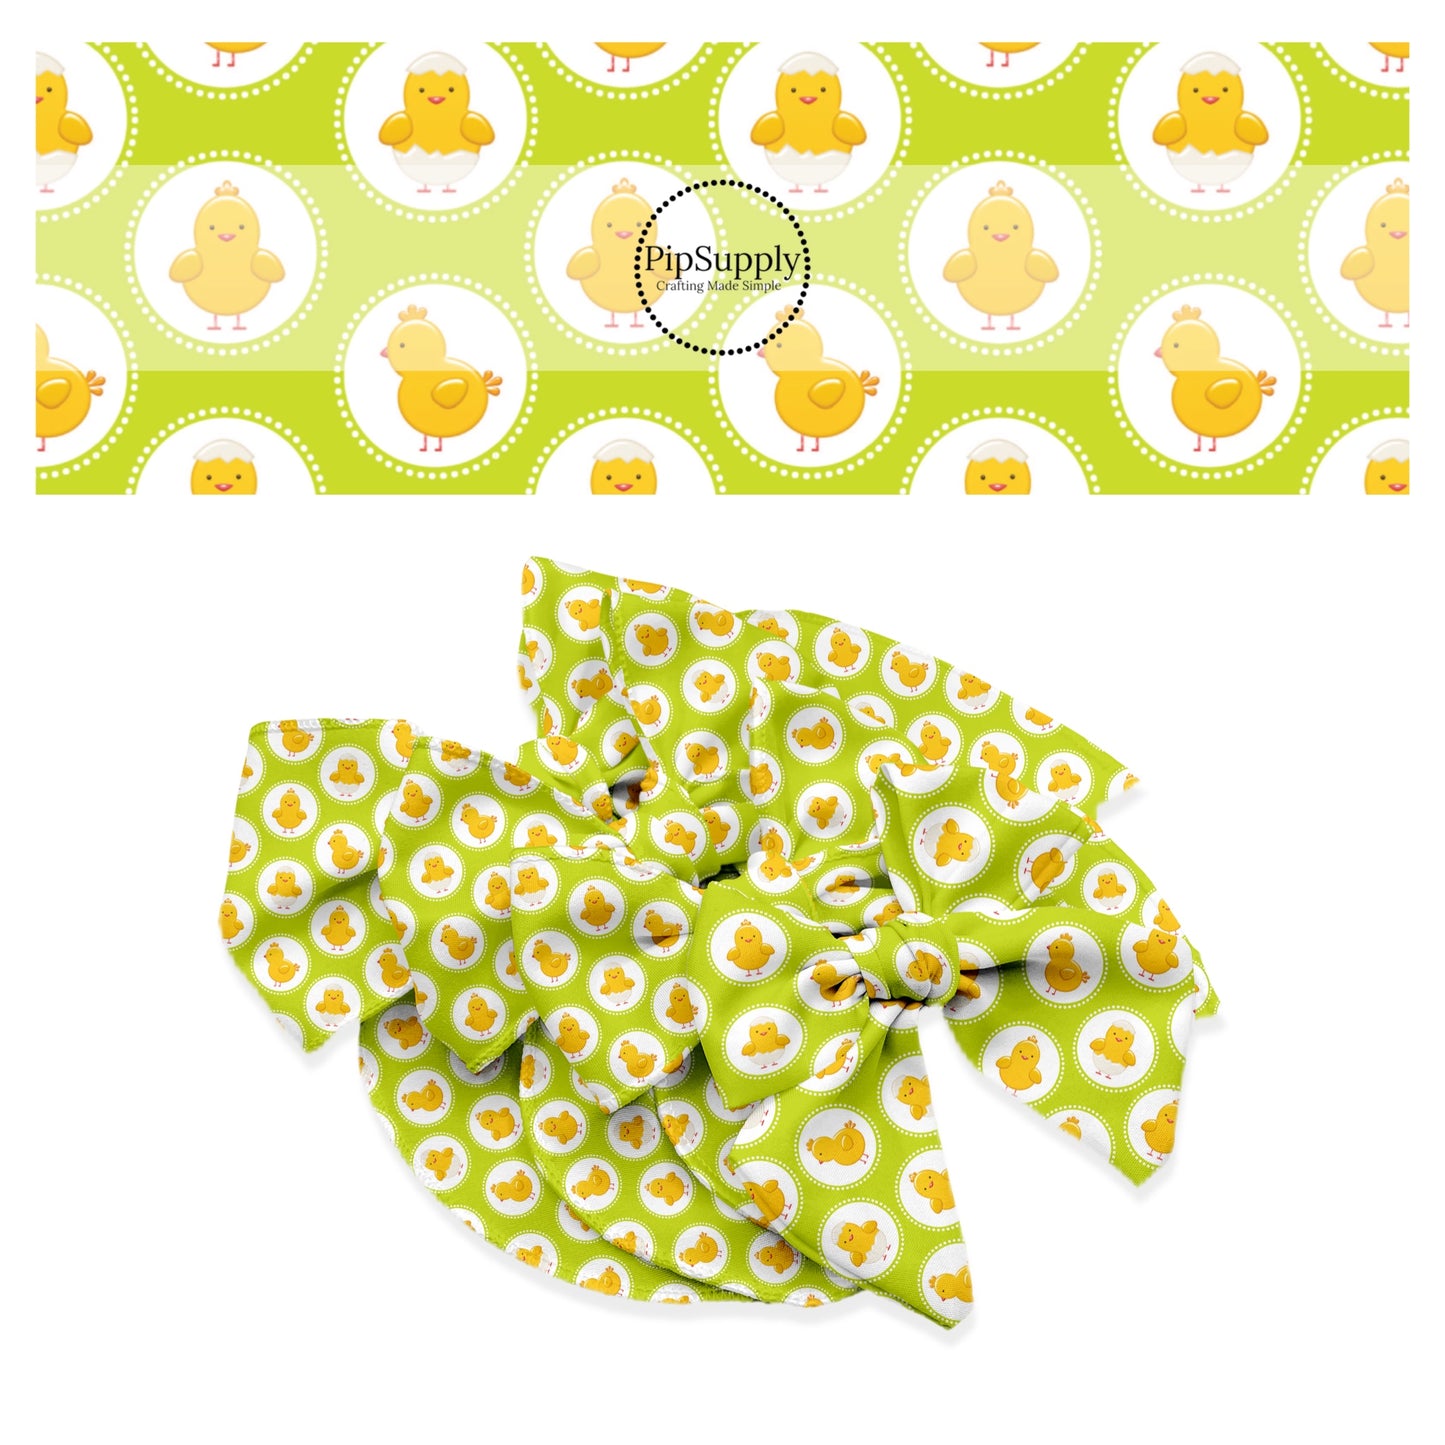 Yellow chicks in white circles with white polka dots on green bow strips